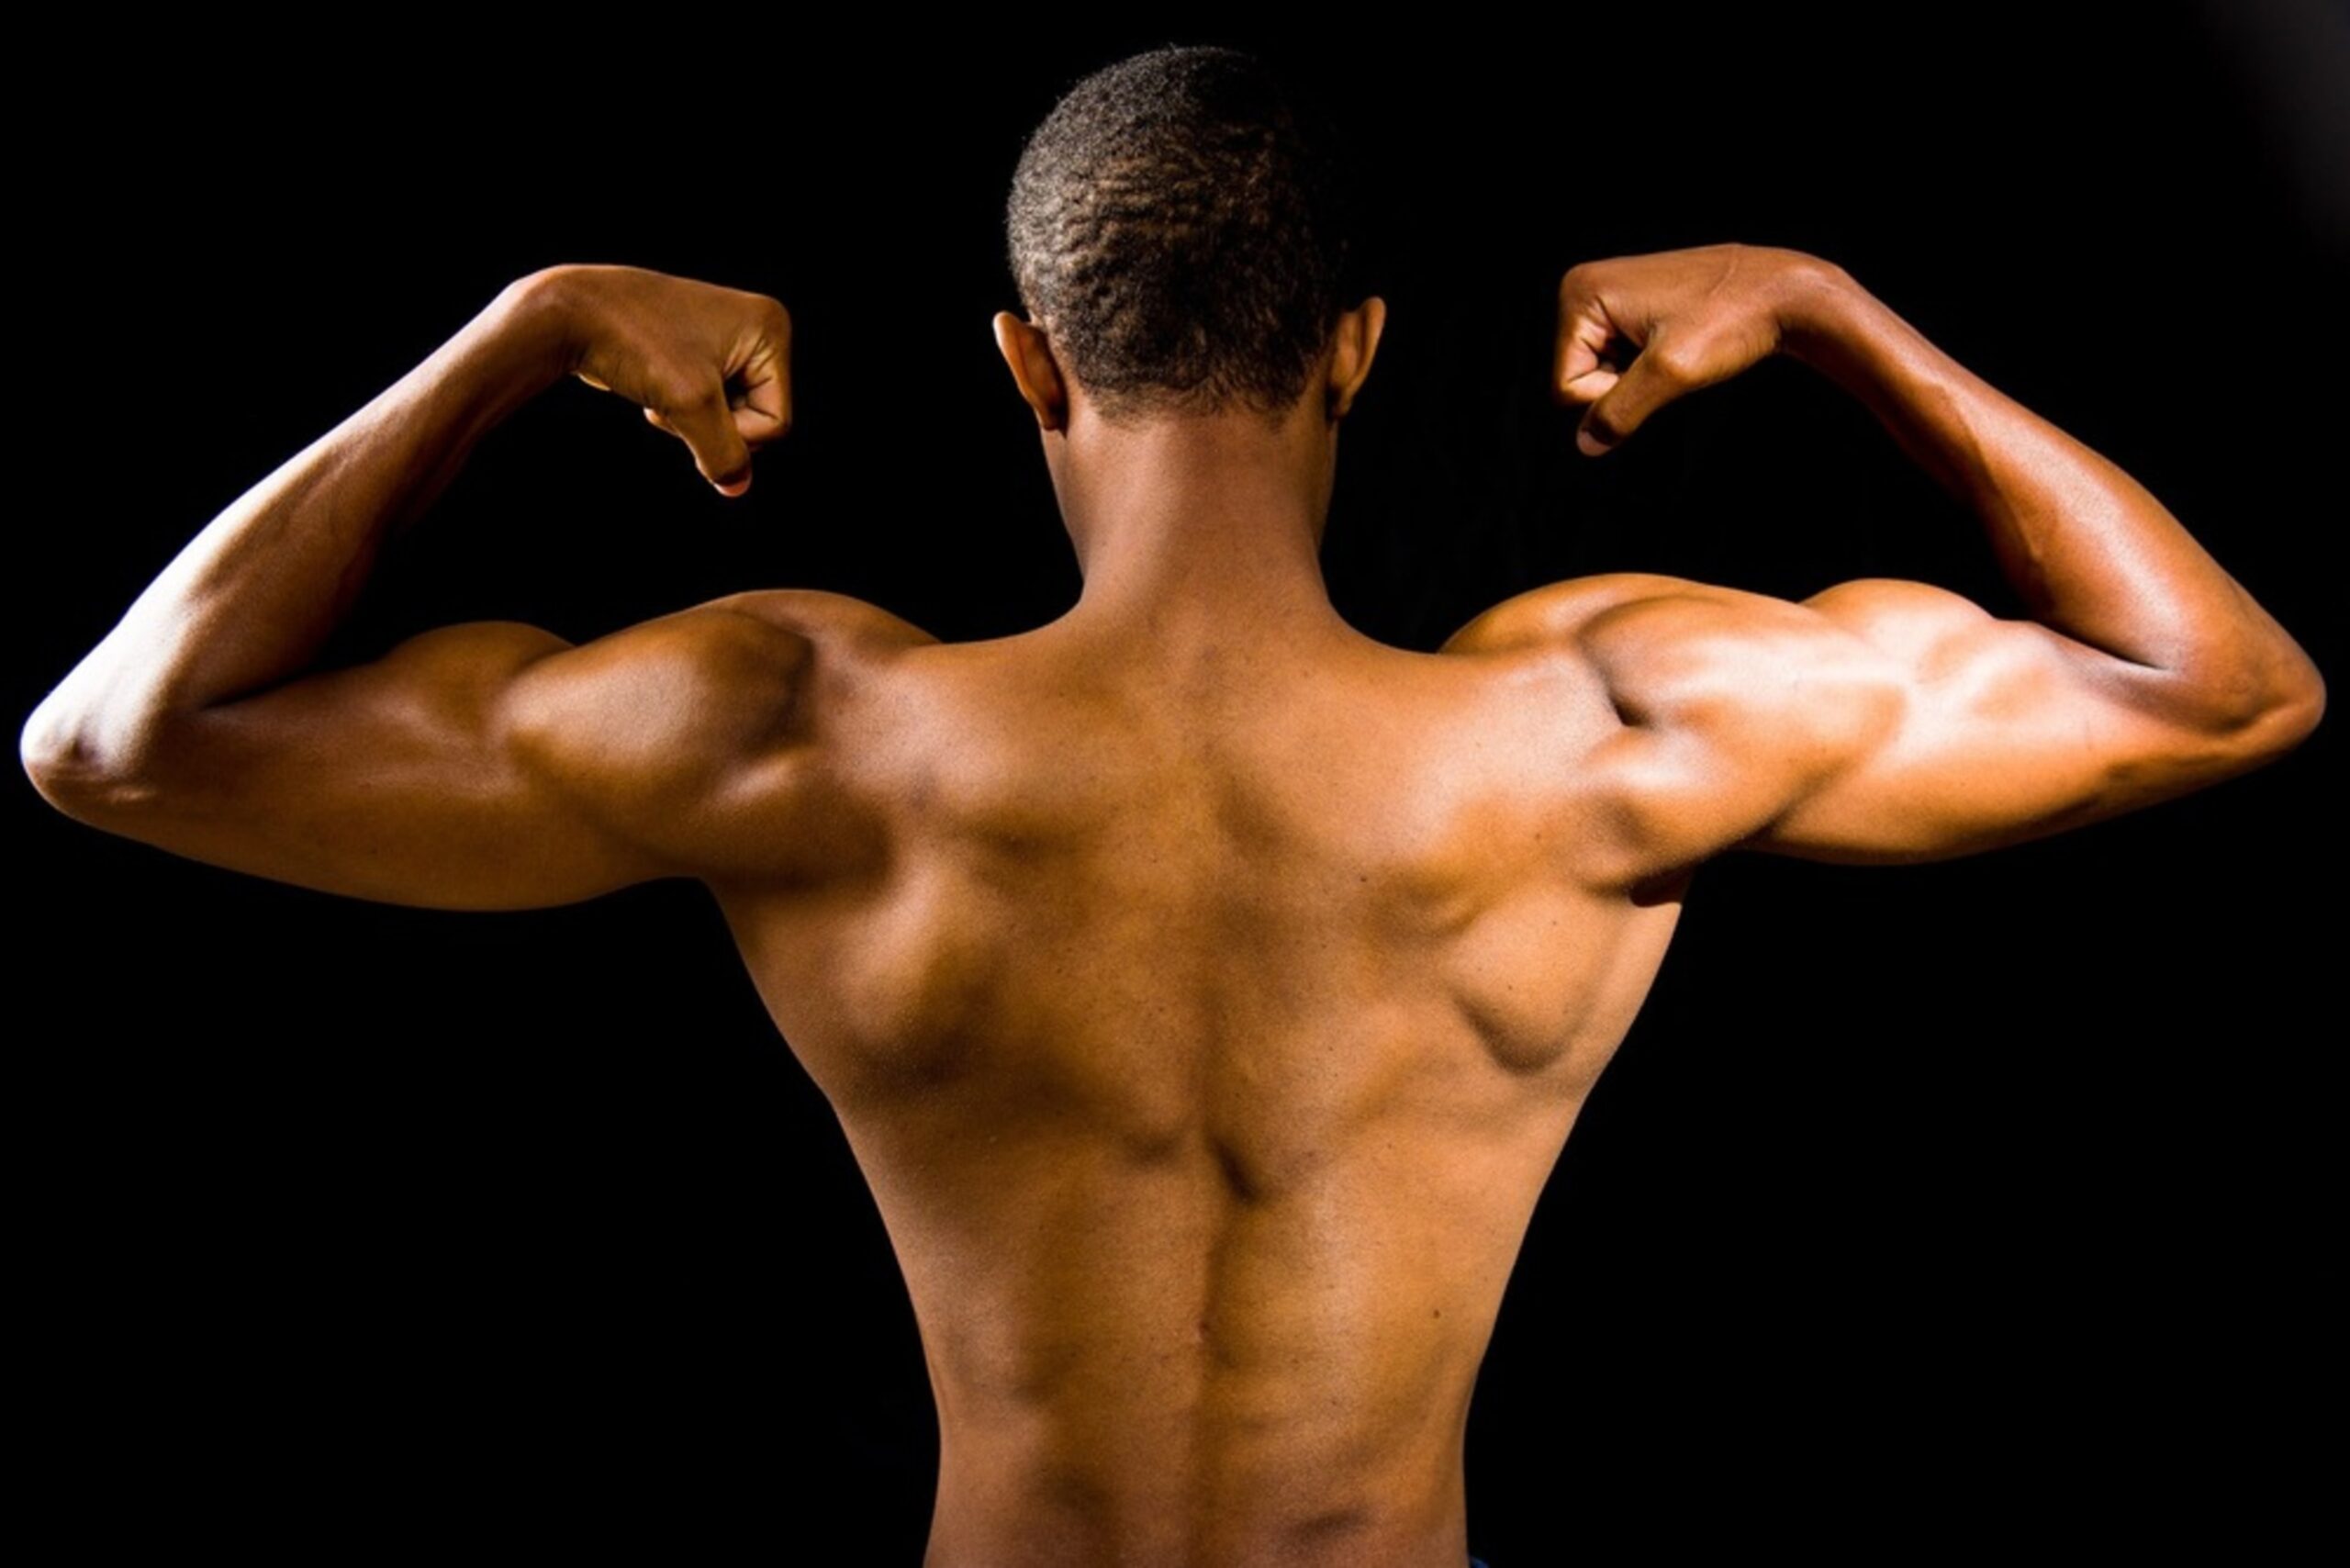 man with big muscles a healthy way to gain weight